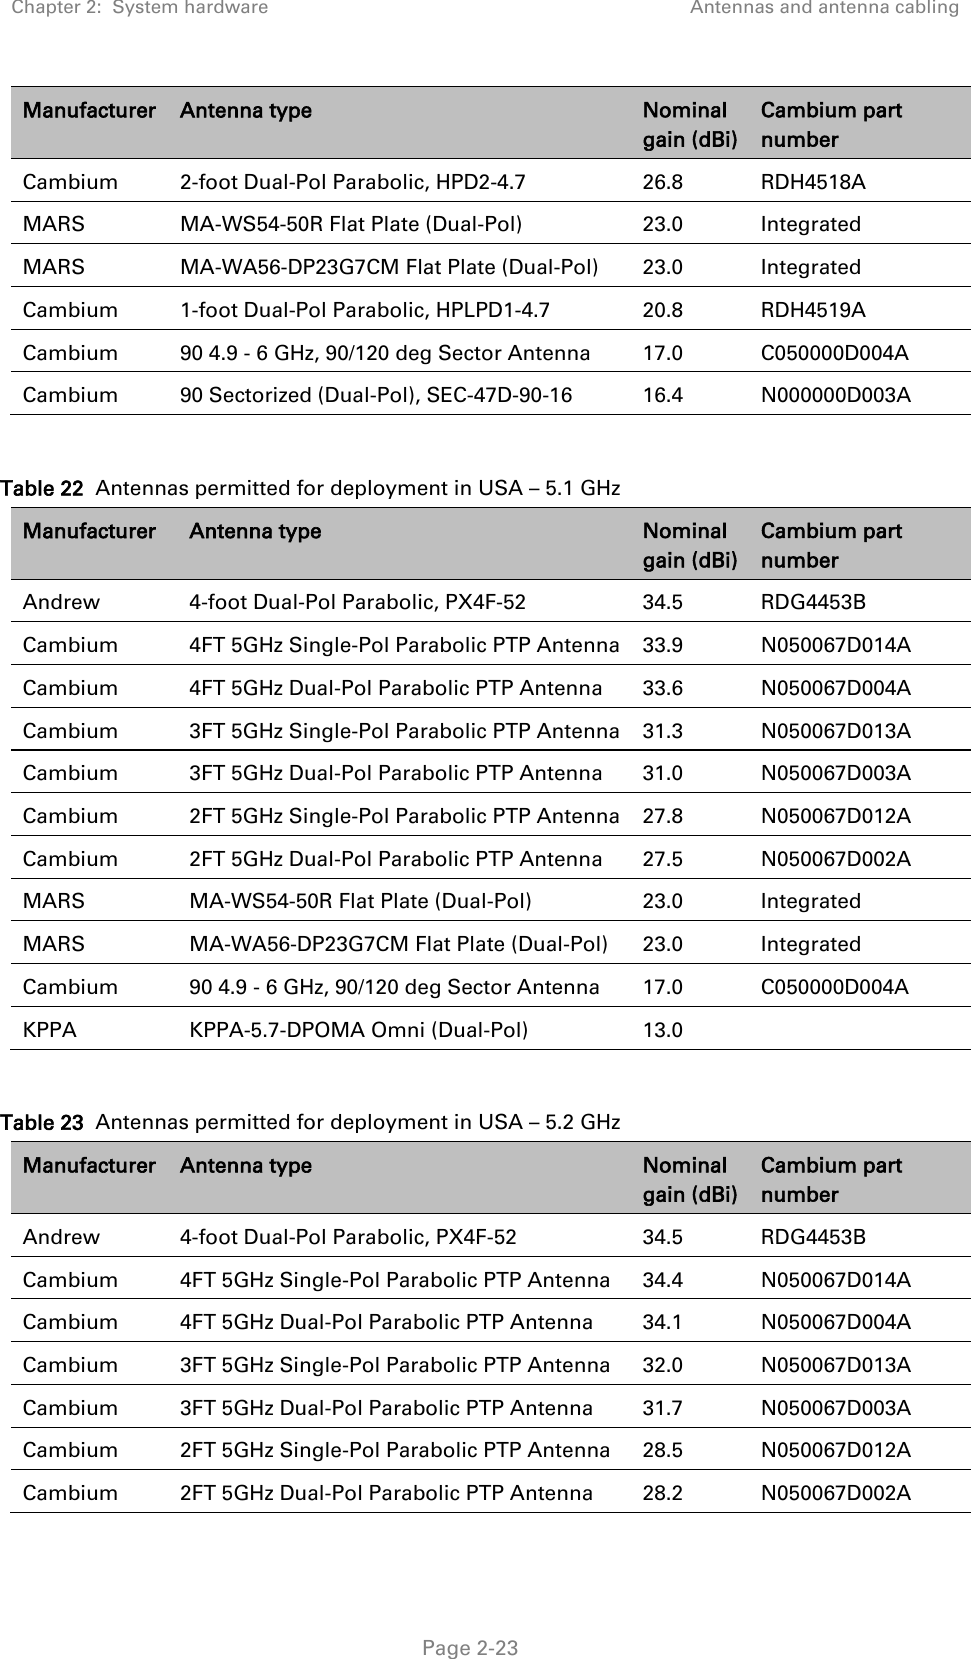 Chapter 2:  System hardware Antennas and antenna cabling   Page 2-23 Manufacturer Antenna type Nominal gain (dBi) Cambium part number Cambium  2-foot Dual-Pol Parabolic, HPD2-4.7 26.8 RDH4518A MARS MA-WS54-50R Flat Plate (Dual-Pol)  23.0  Integrated MARS MA-WA56-DP23G7CM Flat Plate (Dual-Pol)  23.0  Integrated Cambium  1-foot Dual-Pol Parabolic, HPLPD1-4.7 20.8 RDH4519A Cambium 90 4.9 - 6 GHz, 90/120 deg Sector Antenna 17.0 C050000D004A Cambium 90 Sectorized (Dual-Pol), SEC-47D-90-16 16.4 N000000D003A  Table 22  Antennas permitted for deployment in USA – 5.1 GHz Manufacturer Antenna type Nominal gain (dBi) Cambium part number Andrew  4-foot Dual-Pol Parabolic, PX4F-52   34.5 RDG4453B Cambium 4FT 5GHz Single-Pol Parabolic PTP Antenna  33.9 N050067D014A Cambium 4FT 5GHz Dual-Pol Parabolic PTP Antenna 33.6 N050067D004A Cambium 3FT 5GHz Single-Pol Parabolic PTP Antenna 31.3 N050067D013A Cambium 3FT 5GHz Dual-Pol Parabolic PTP Antenna 31.0 N050067D003A Cambium 2FT 5GHz Single-Pol Parabolic PTP Antenna 27.8 N050067D012A Cambium 2FT 5GHz Dual-Pol Parabolic PTP Antenna 27.5 N050067D002A MARS MA-WS54-50R Flat Plate (Dual-Pol)  23.0  Integrated MARS MA-WA56-DP23G7CM Flat Plate (Dual-Pol)  23.0  Integrated Cambium 90 4.9 - 6 GHz, 90/120 deg Sector Antenna 17.0 C050000D004A KPPA  KPPA-5.7-DPOMA Omni (Dual-Pol)  13.0     Table 23  Antennas permitted for deployment in USA – 5.2 GHz Manufacturer Antenna type Nominal gain (dBi) Cambium part number Andrew  4-foot Dual-Pol Parabolic, PX4F-52   34.5 RDG4453B Cambium 4FT 5GHz Single-Pol Parabolic PTP Antenna 34.4 N050067D014A Cambium 4FT 5GHz Dual-Pol Parabolic PTP Antenna 34.1 N050067D004A Cambium 3FT 5GHz Single-Pol Parabolic PTP Antenna 32.0 N050067D013A Cambium 3FT 5GHz Dual-Pol Parabolic PTP Antenna 31.7 N050067D003A Cambium 2FT 5GHz Single-Pol Parabolic PTP Antenna 28.5 N050067D012A Cambium 2FT 5GHz Dual-Pol Parabolic PTP Antenna 28.2 N050067D002A 